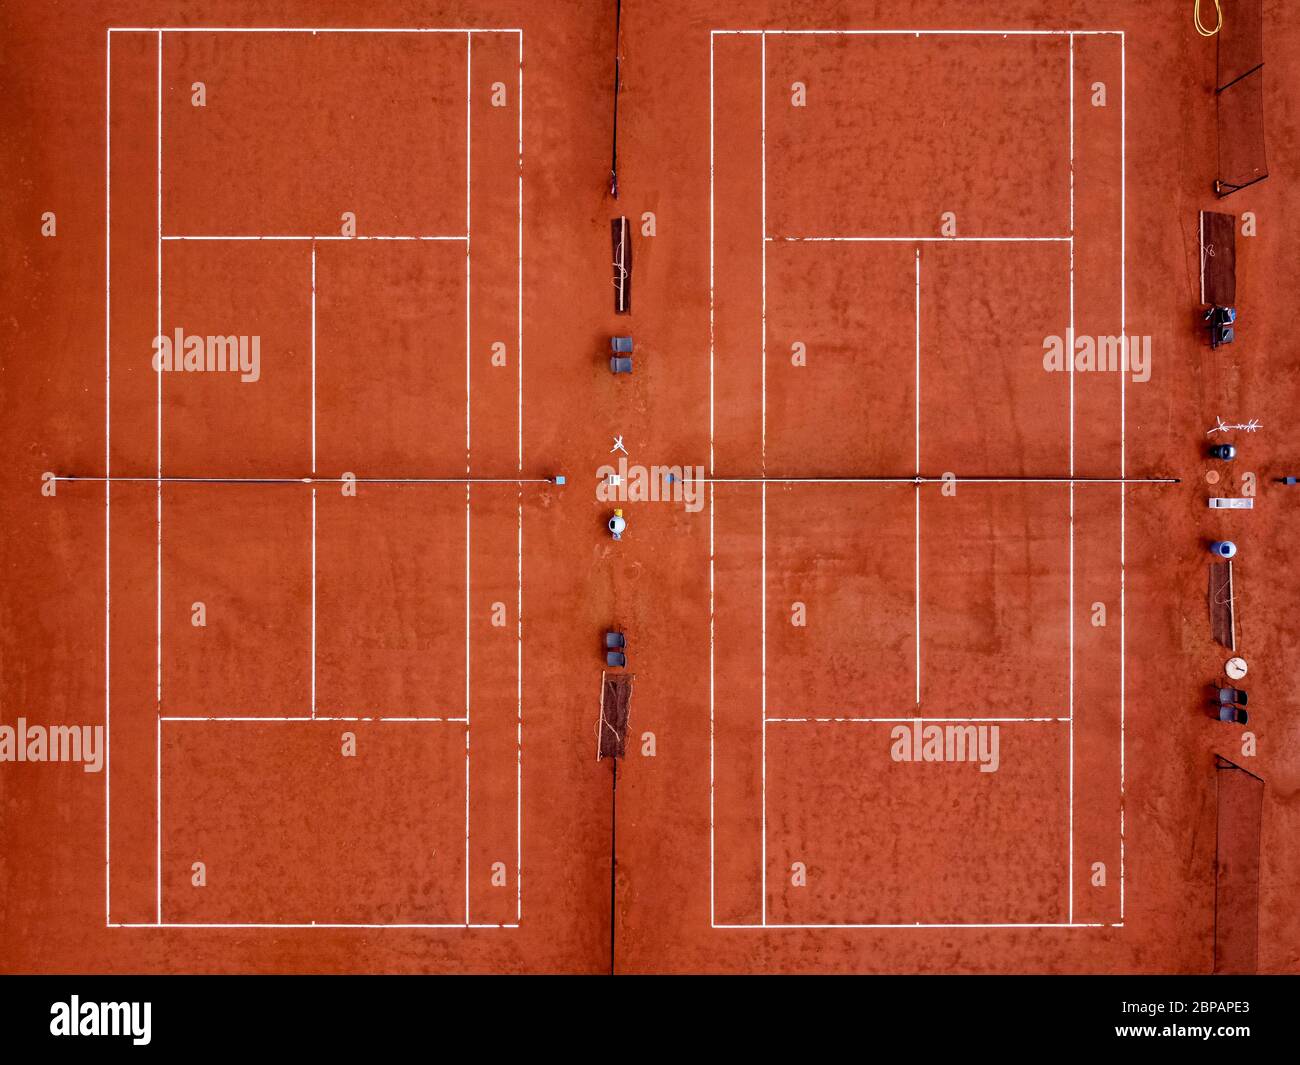 Grugliasco, Italy - 18 May, 2020: (EDITORS NOTE: Image was created with a drone.) Aerial view shows two empty clay tennis courts. The lockdown due to the COVID-19 coronavirus emergency banned all sports activities. Credit: Nicolò Campo/Alamy Live News Stock Photo